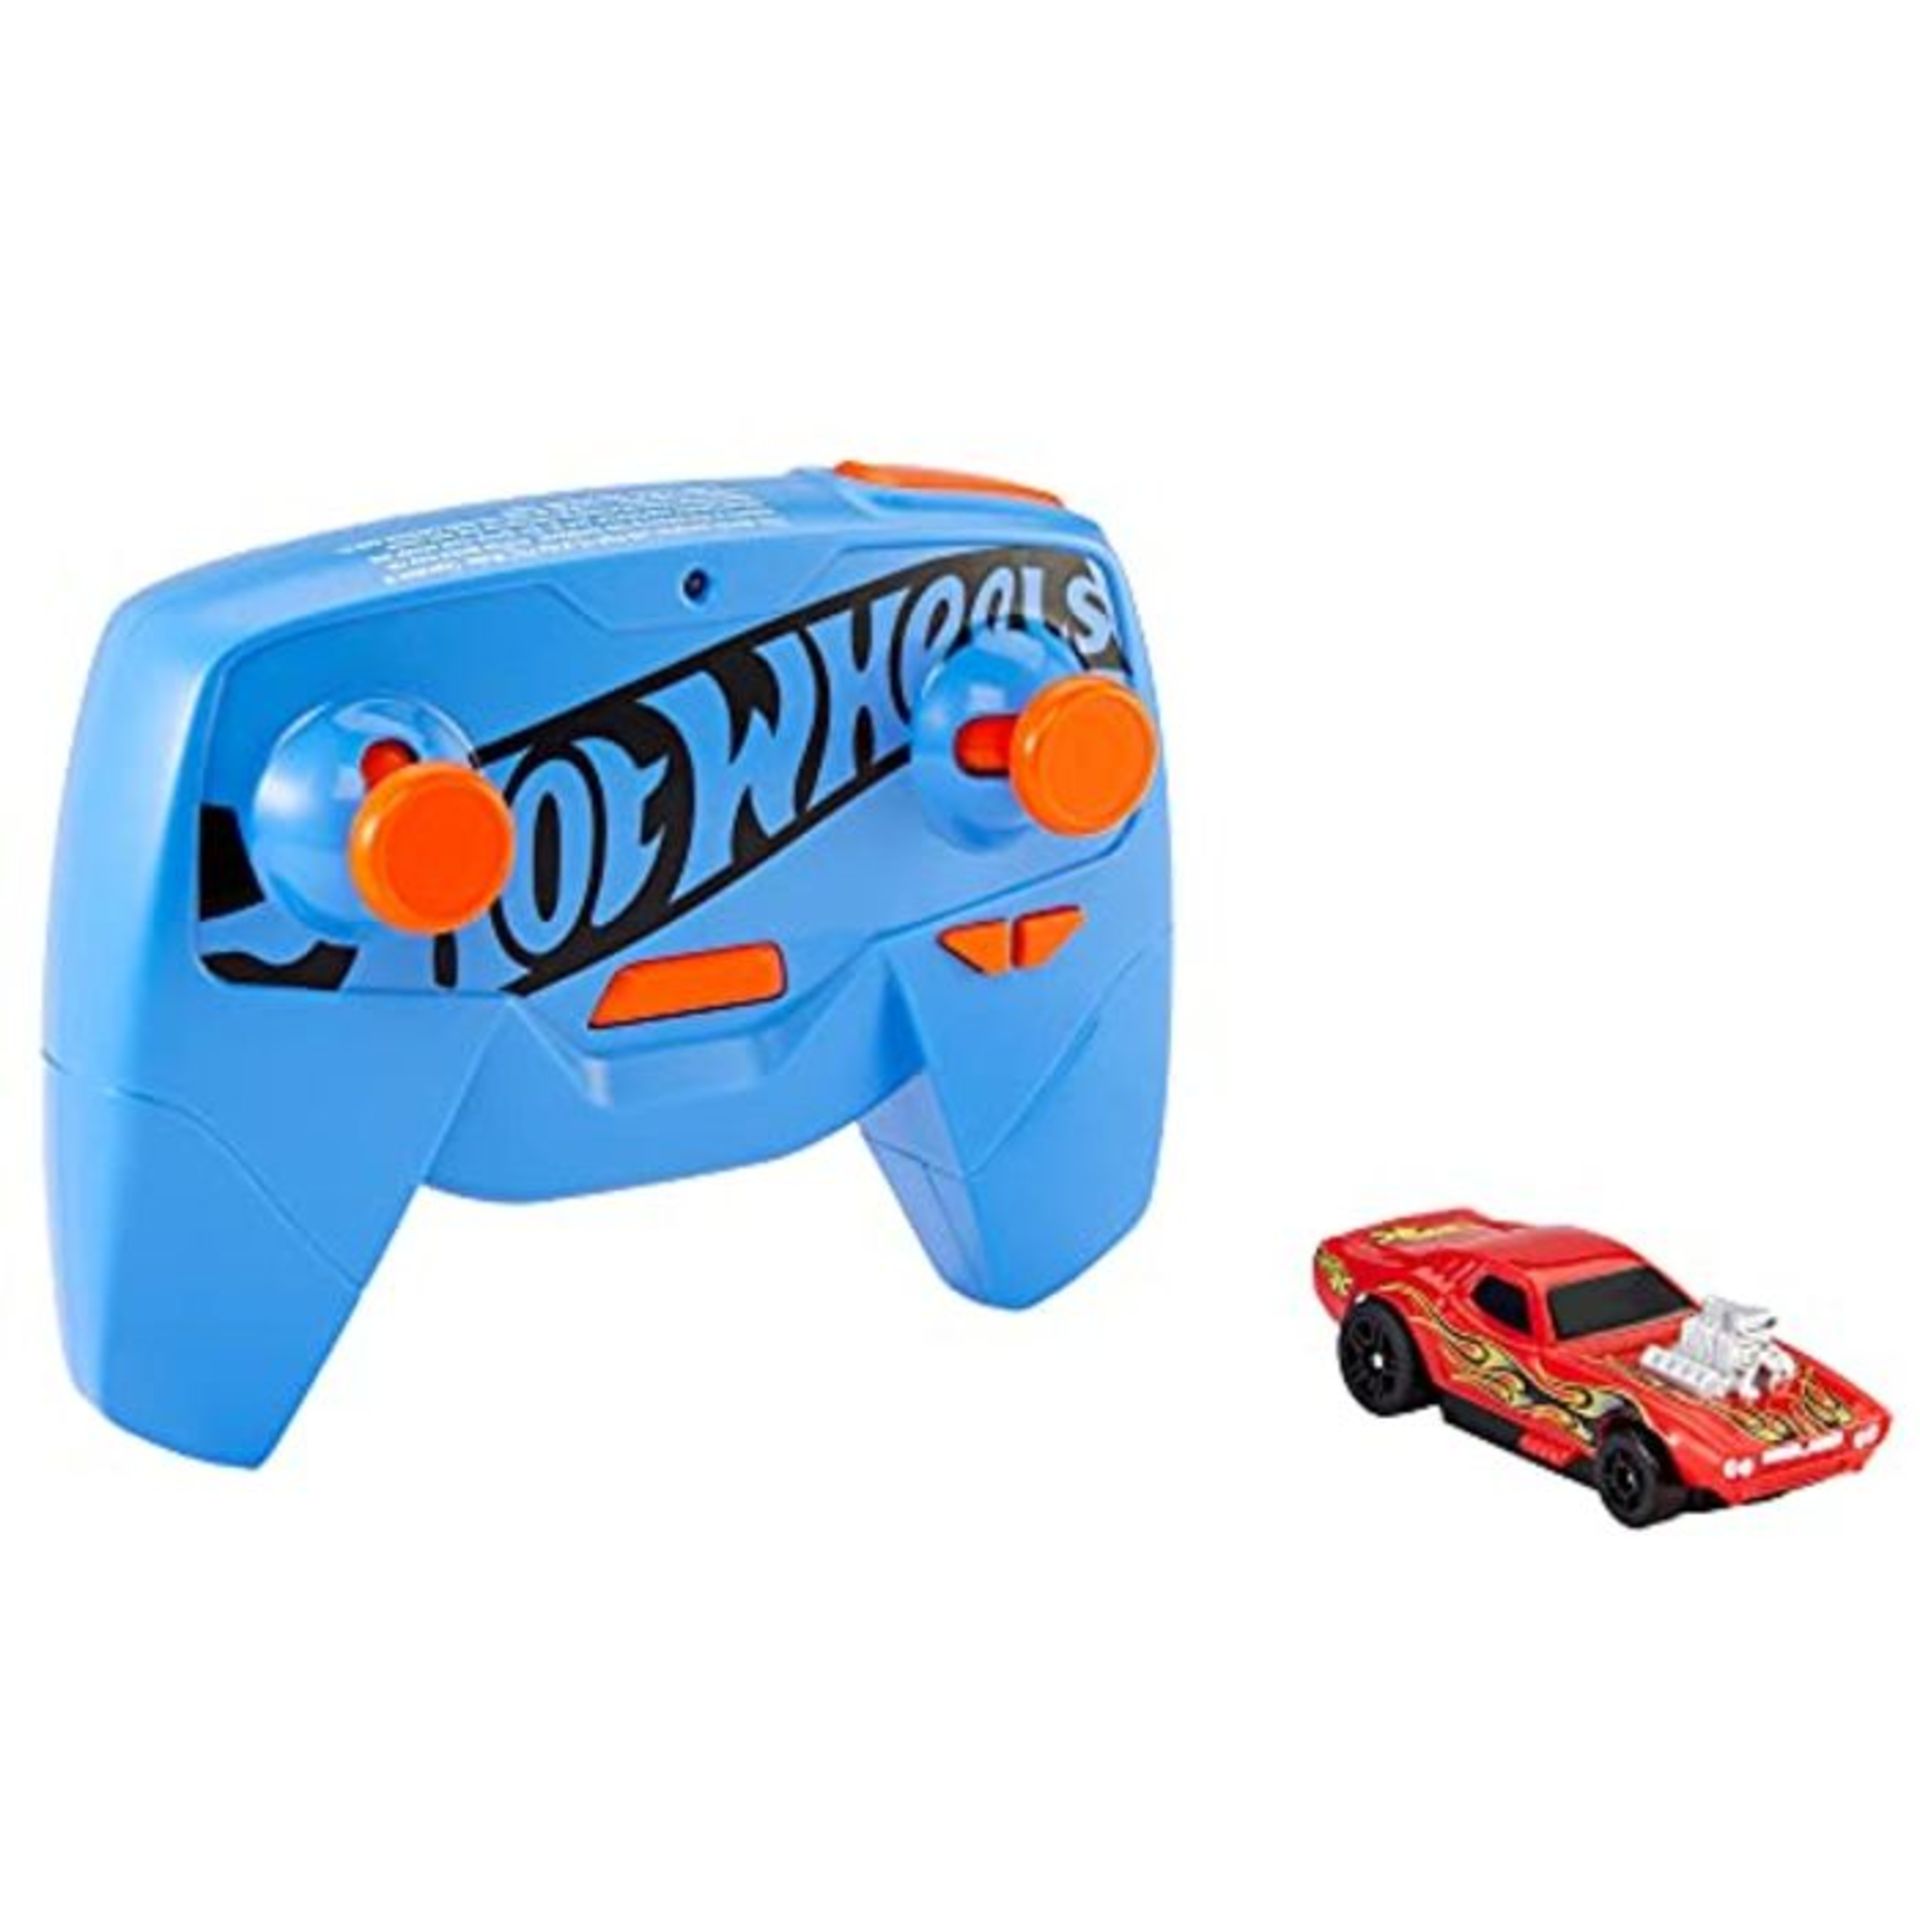 Hot Wheels R/C 1:64 Scale Rechargeable Radio-Controlled Racing Cars for On- or Off-Tra